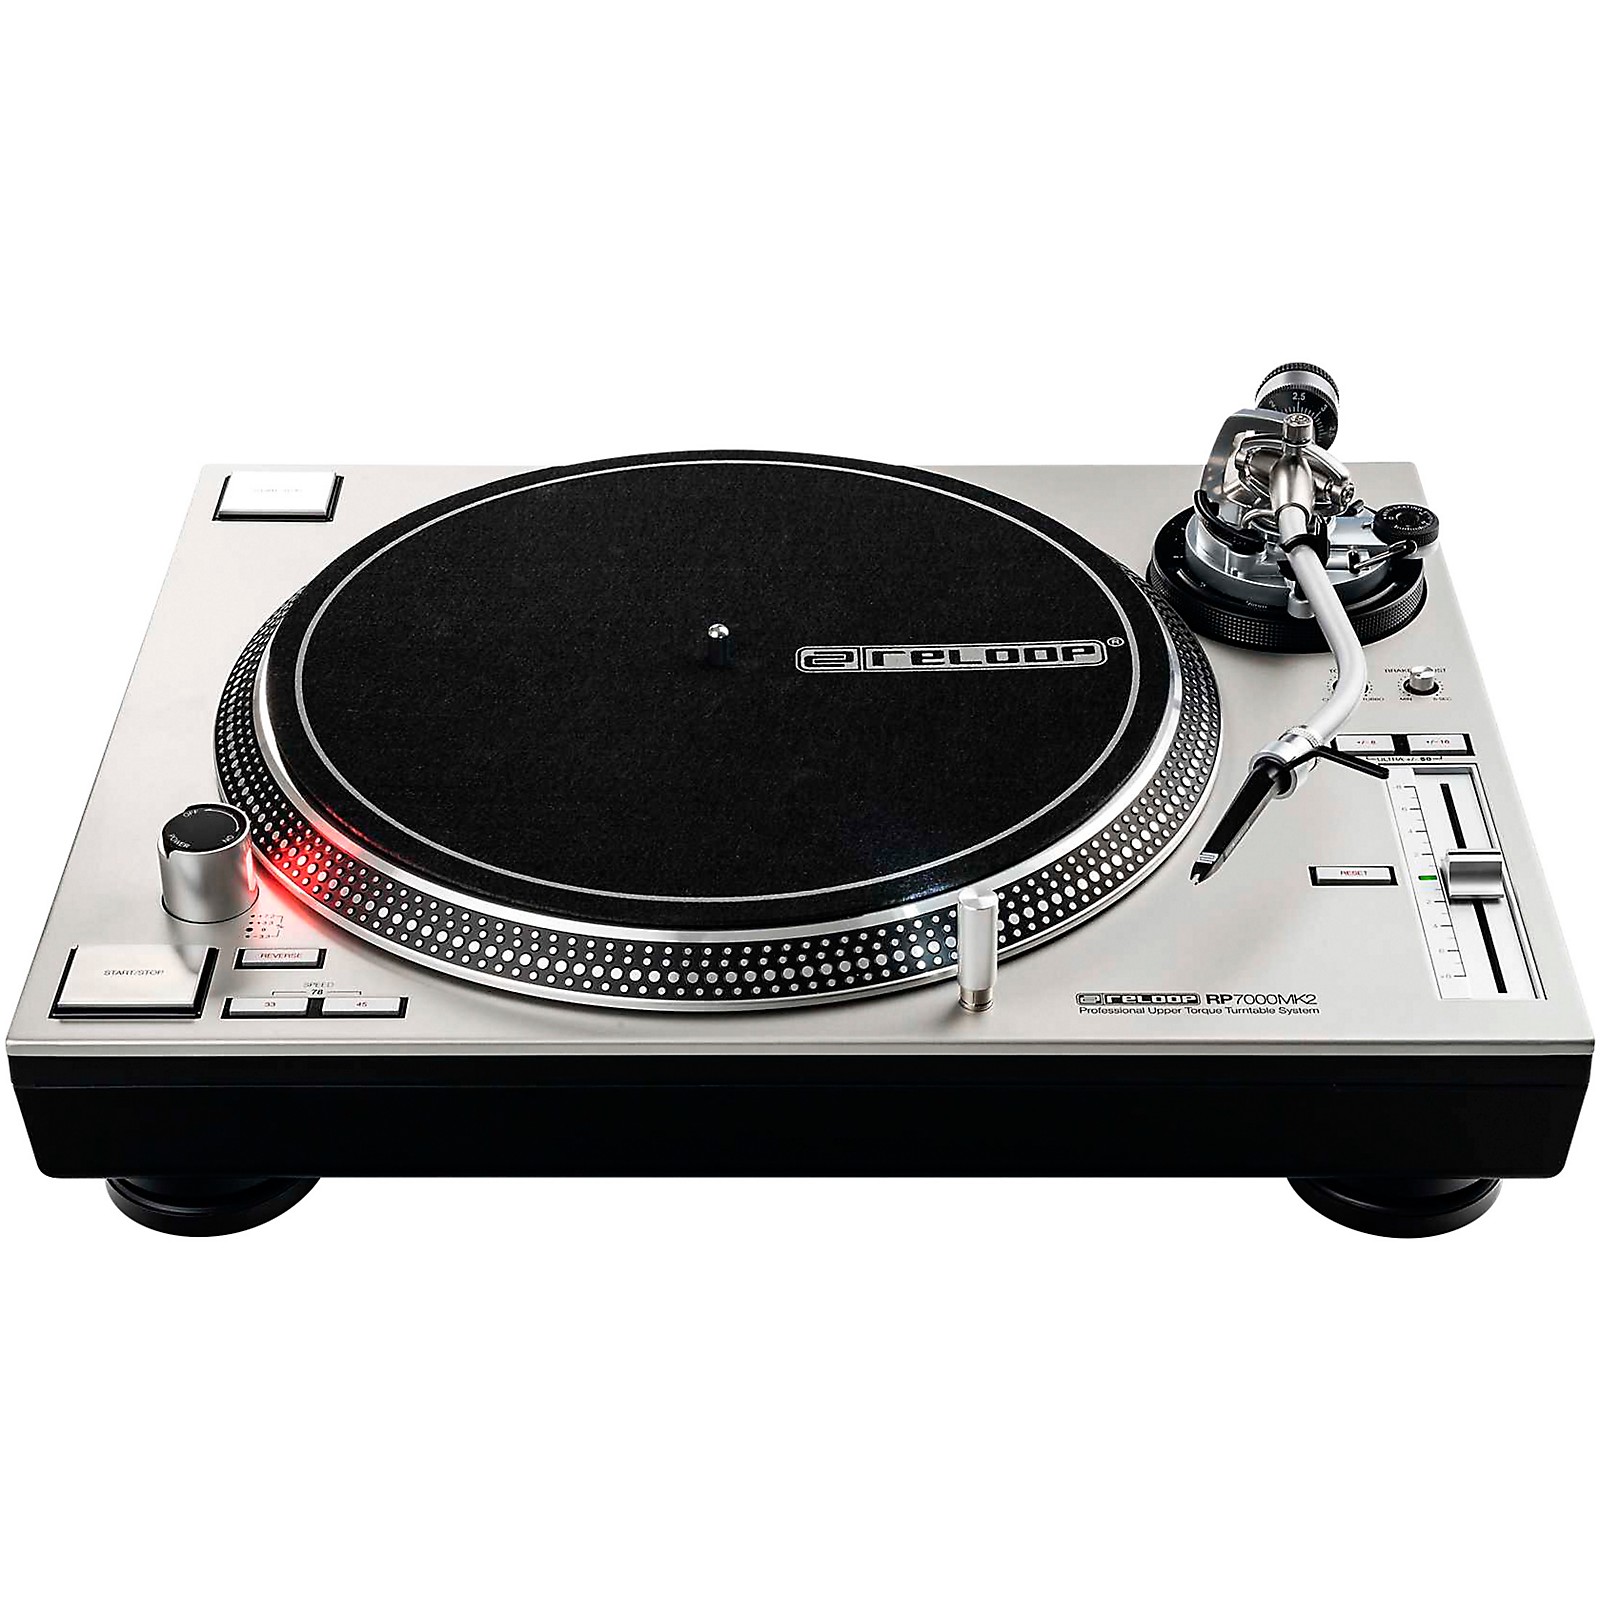 Reloop RP-7000-MK2 Professional Direct-Drive Turntable (Silver